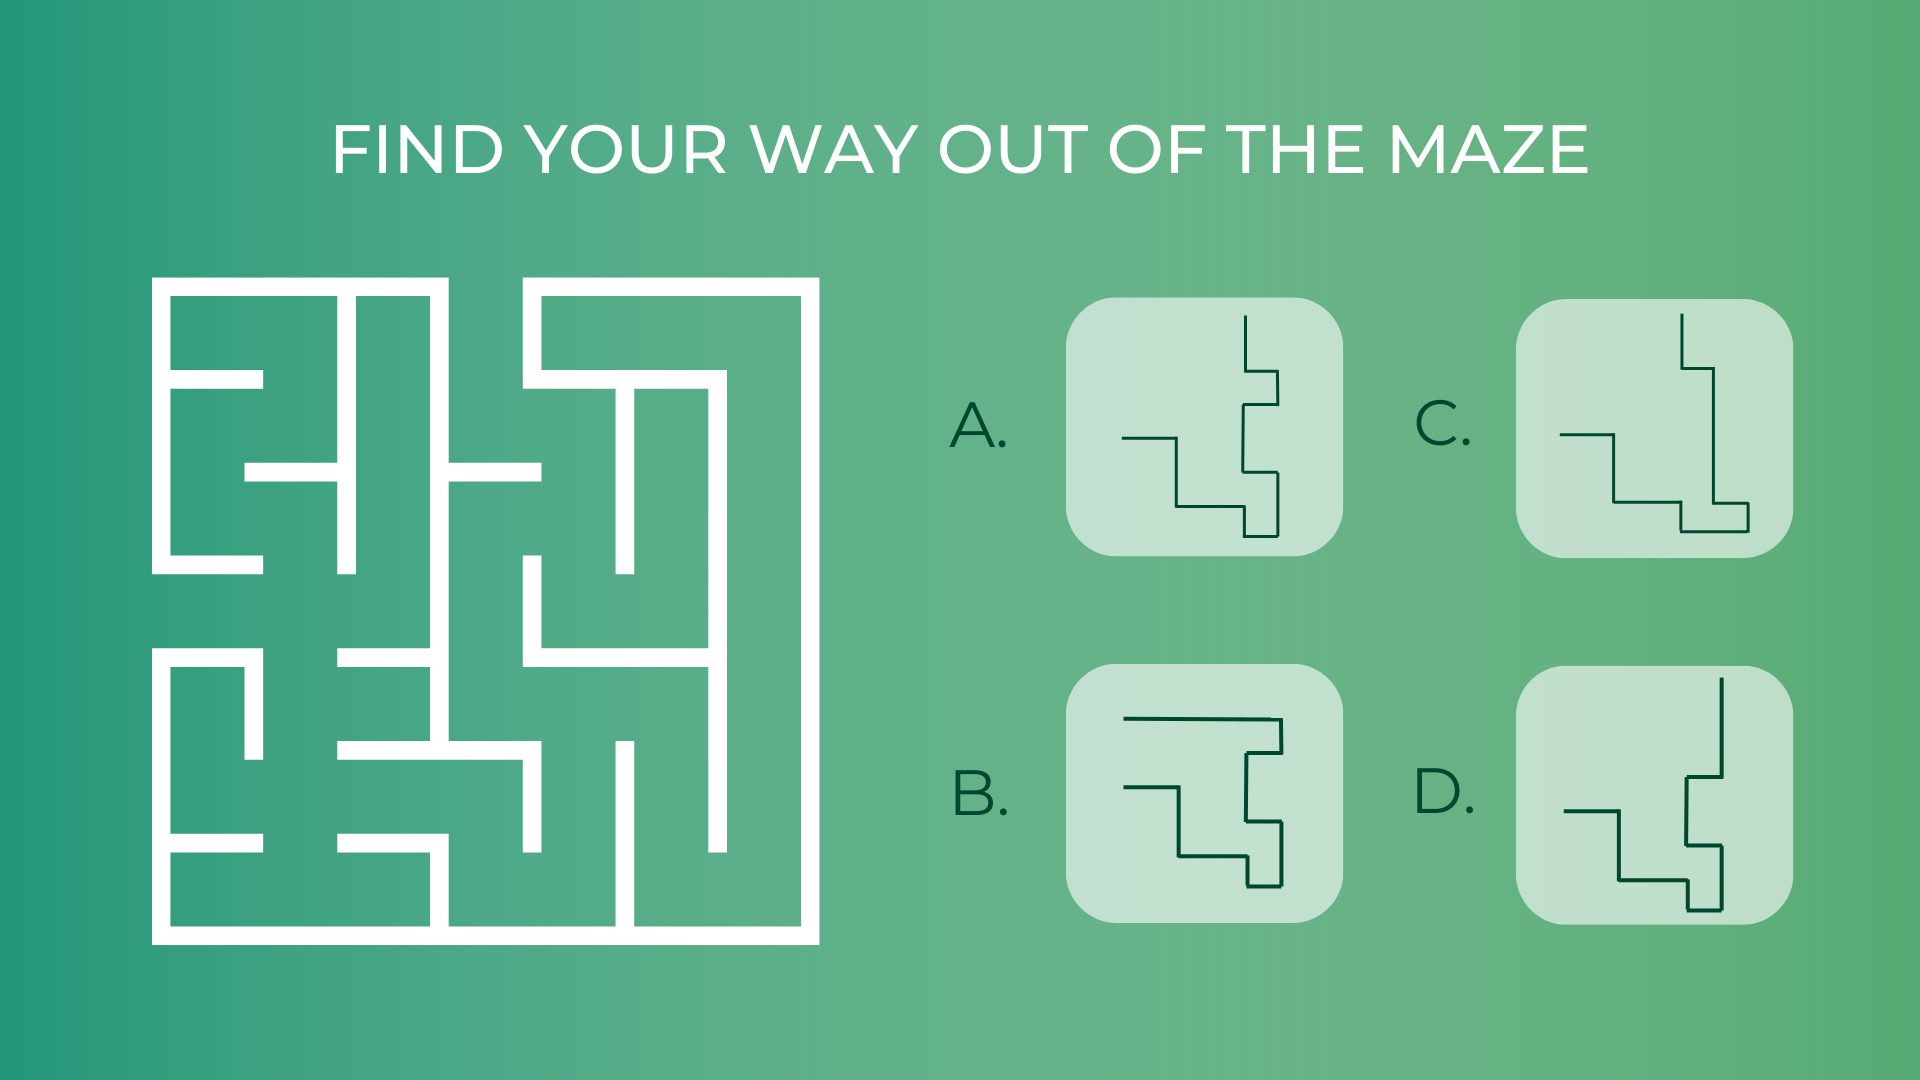 Example of Logic based IQ quiz question (maze showing routes)